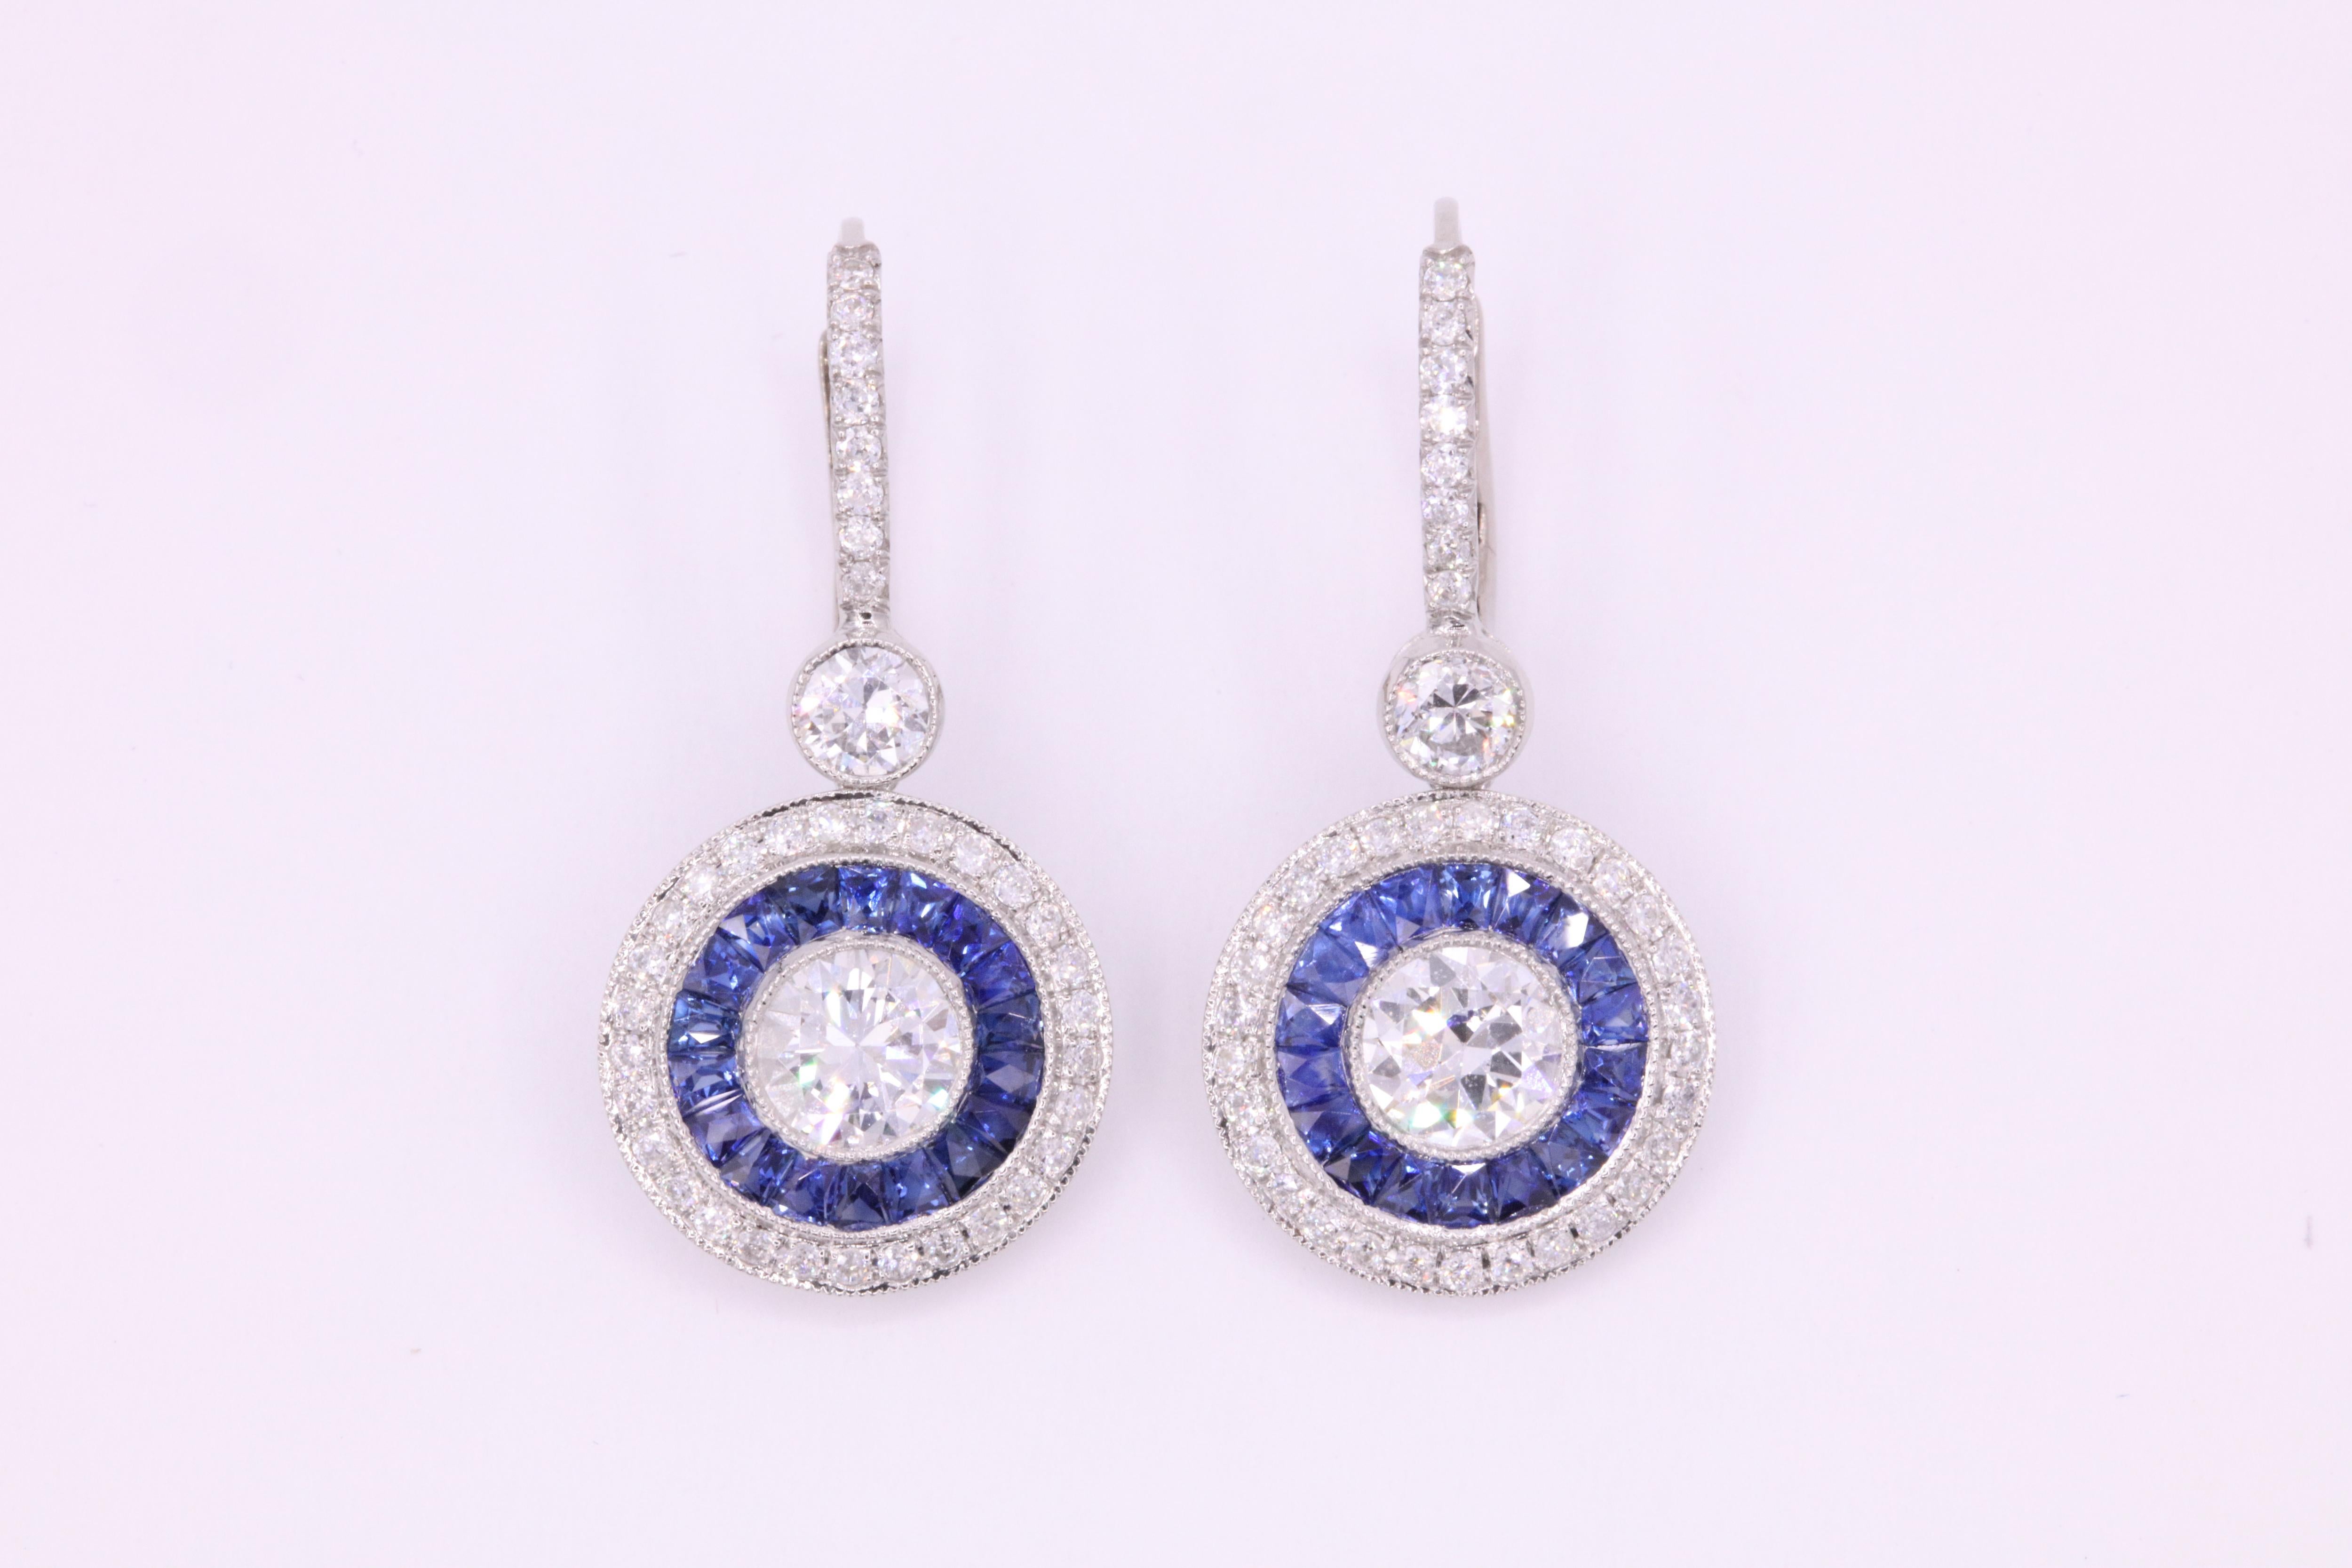 Art Deco inspired earrings featuring 2 round brilliants weighing 1.67 carats flanked with vibrant blue sapphires, 1.53 carats and diamonds 0.95 carats, crafted in platinum.